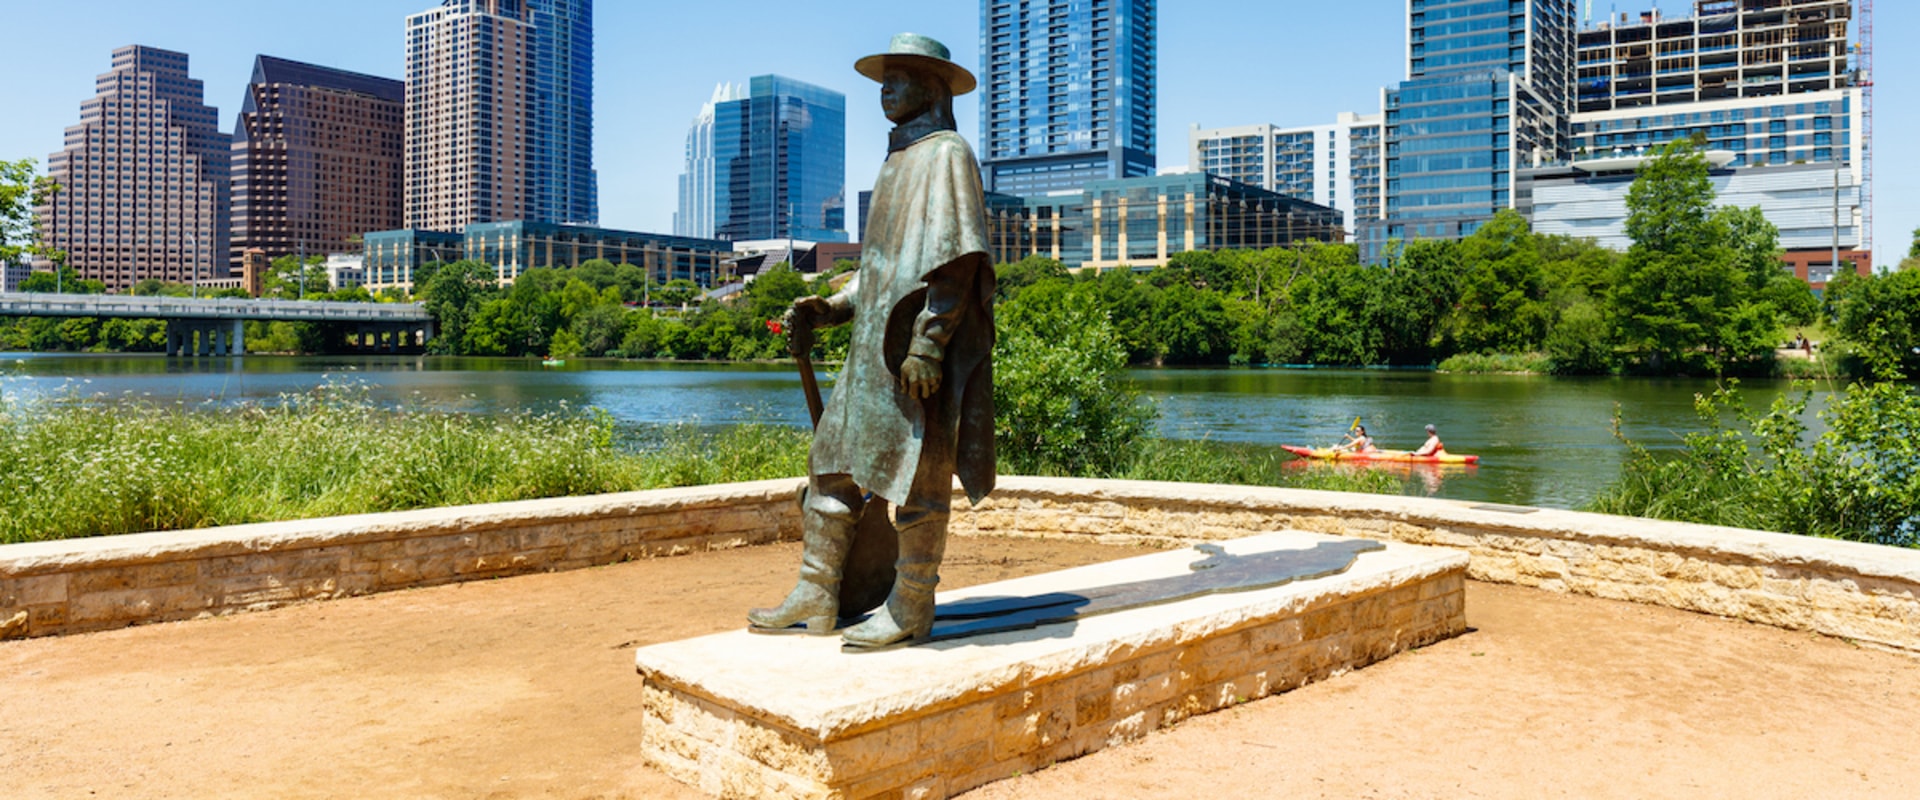 Is austin texas expensive to live?